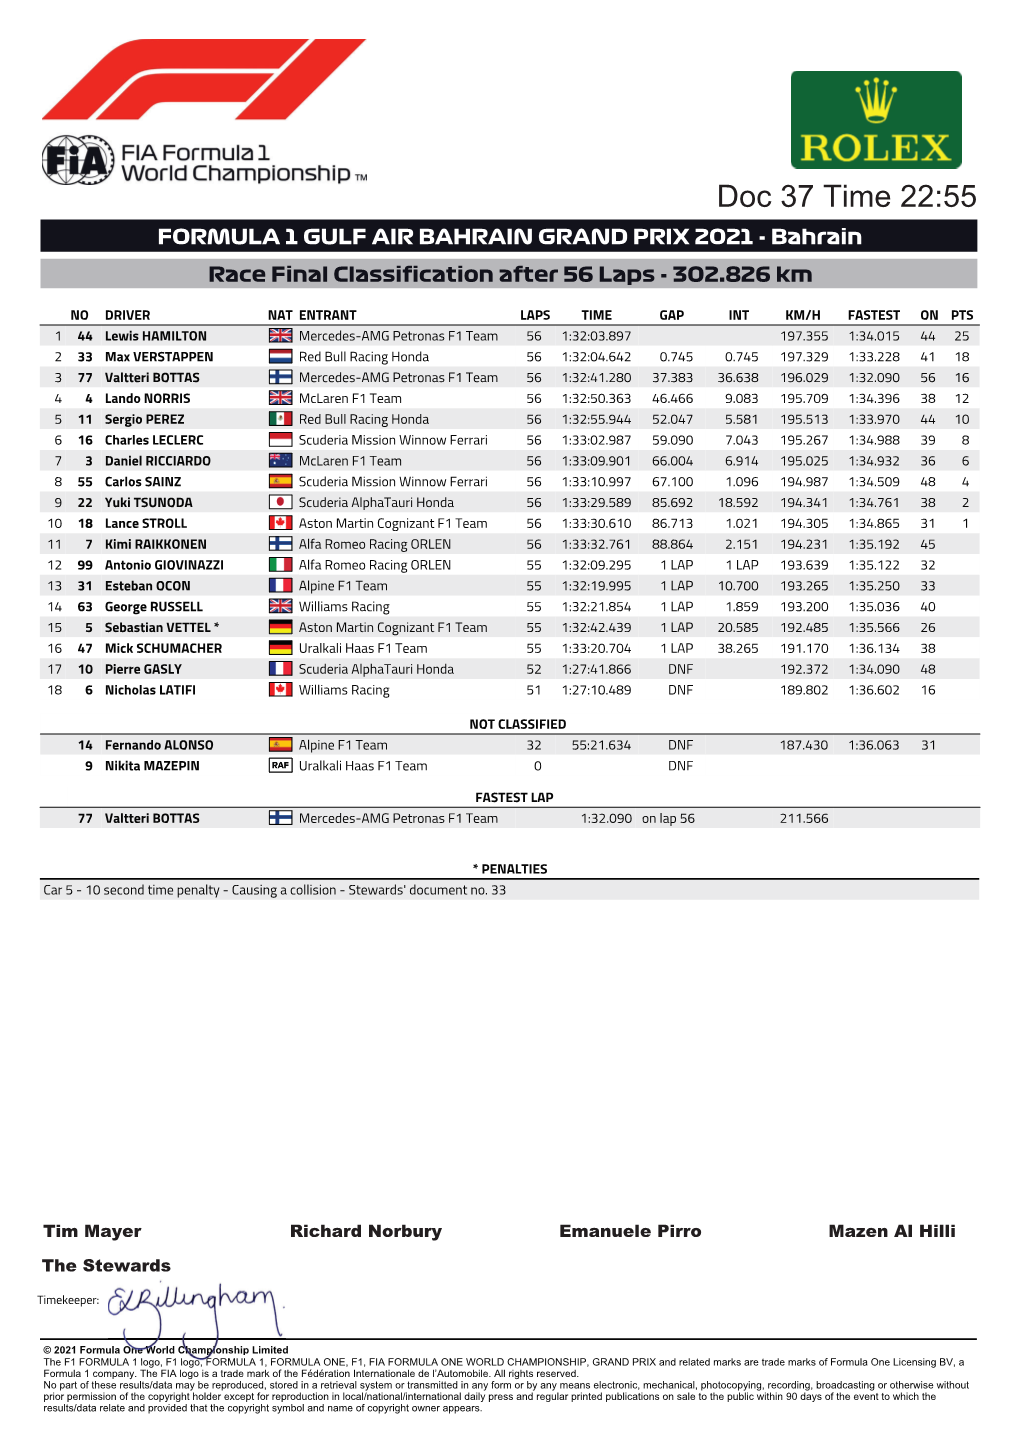 Race Results